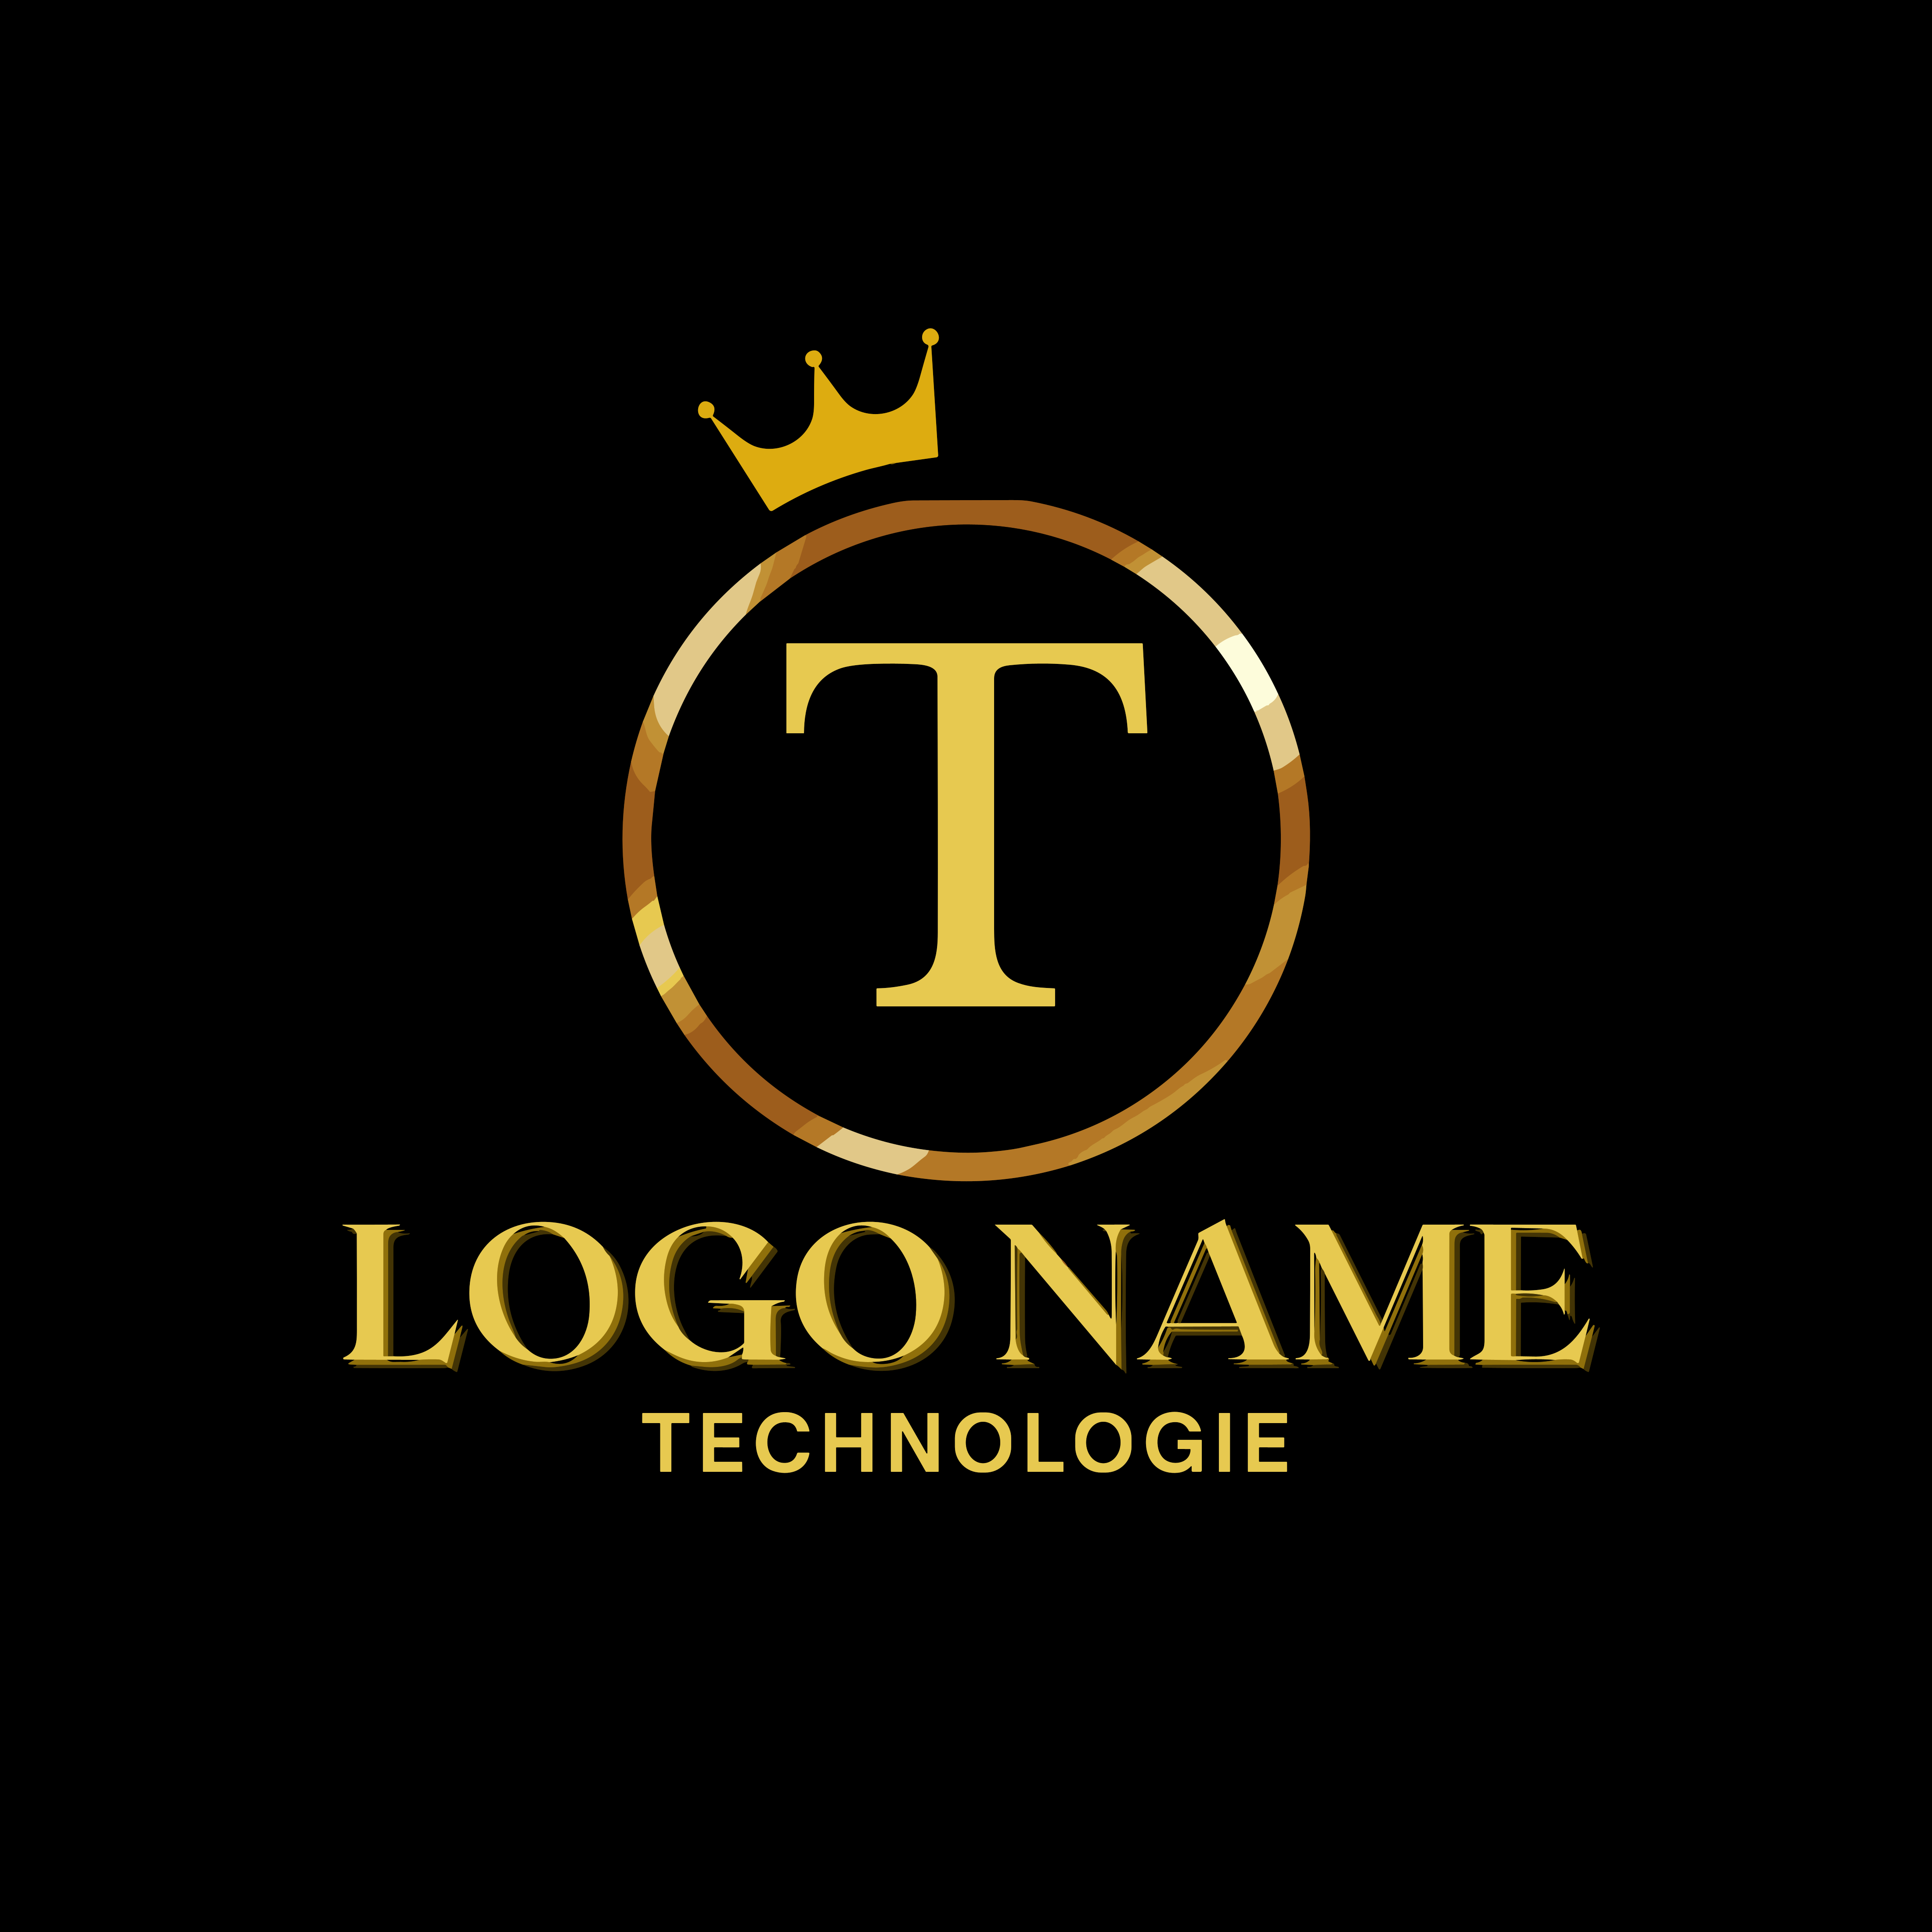 electronic logo or icon design logo with vector image preview image.